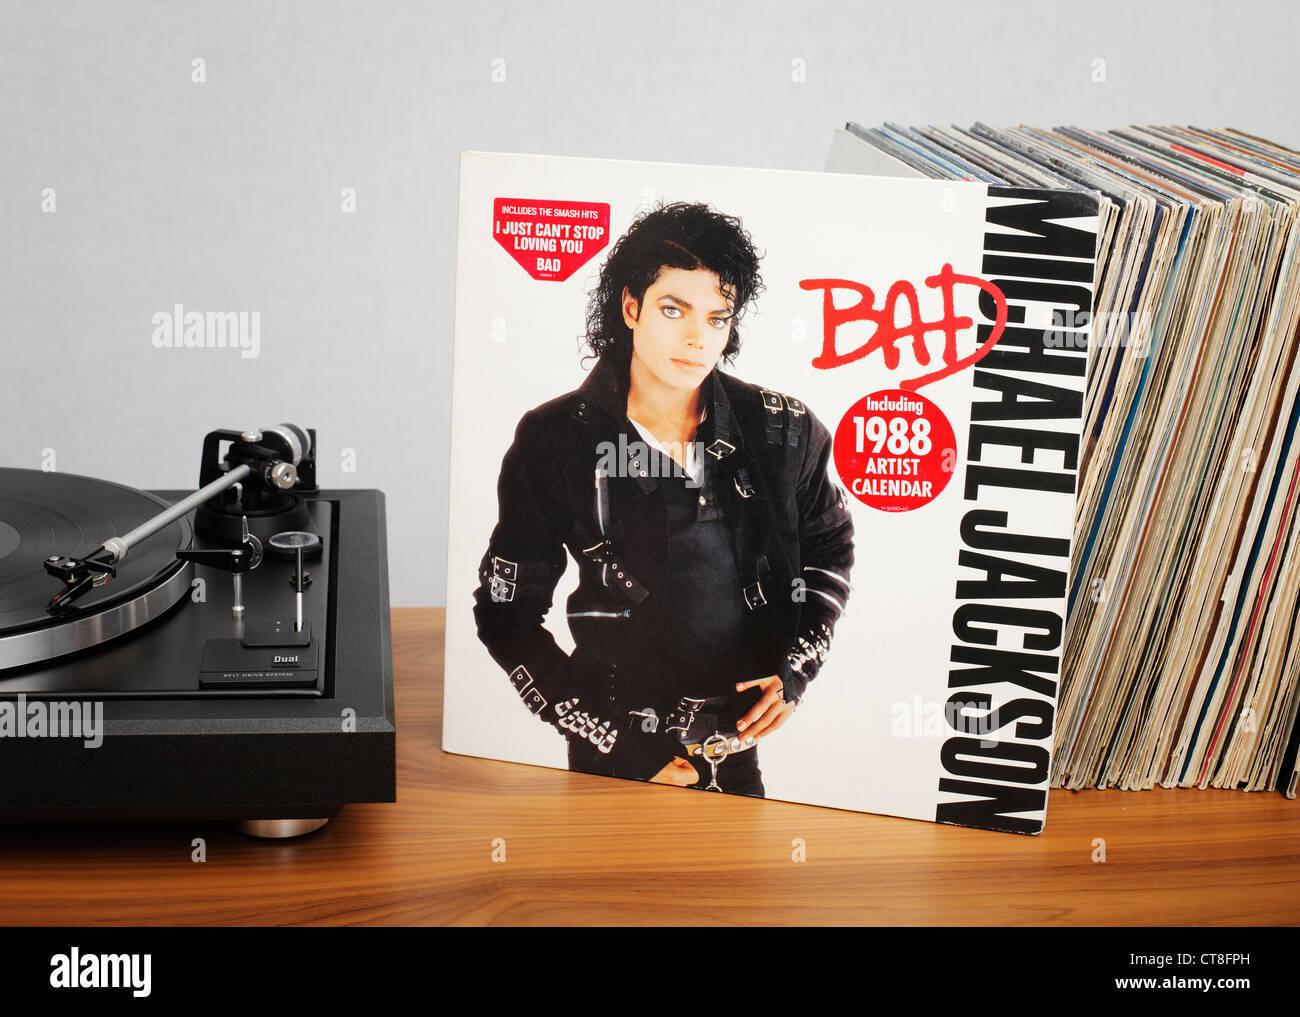 Bad is the seventh studio album by American recording artist Michael Jackson. The album was released on August 31, 1987. Stock Photo